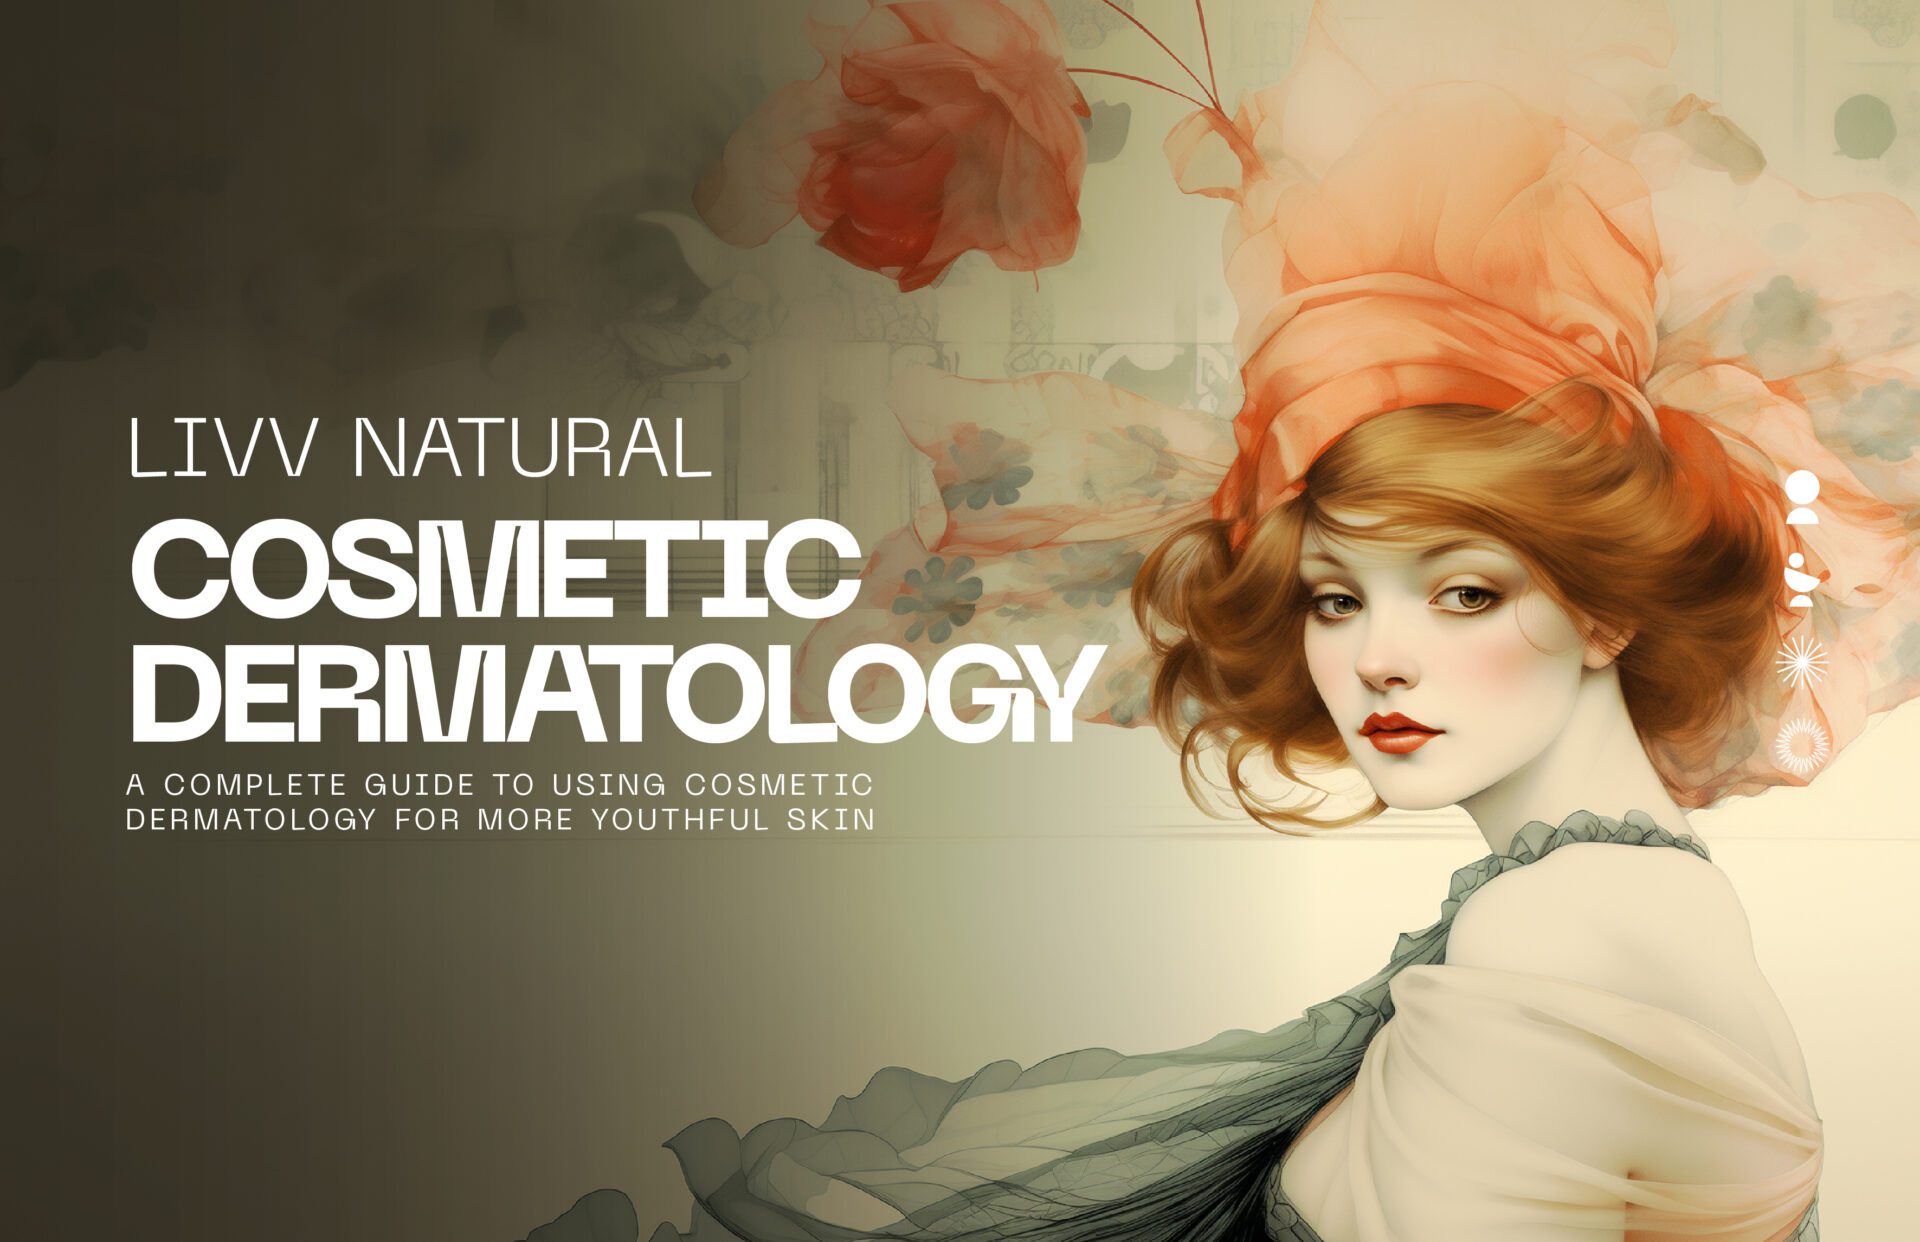 Comestic dermatology. A complete guide to using cosmetic dermatology for more youthful skin